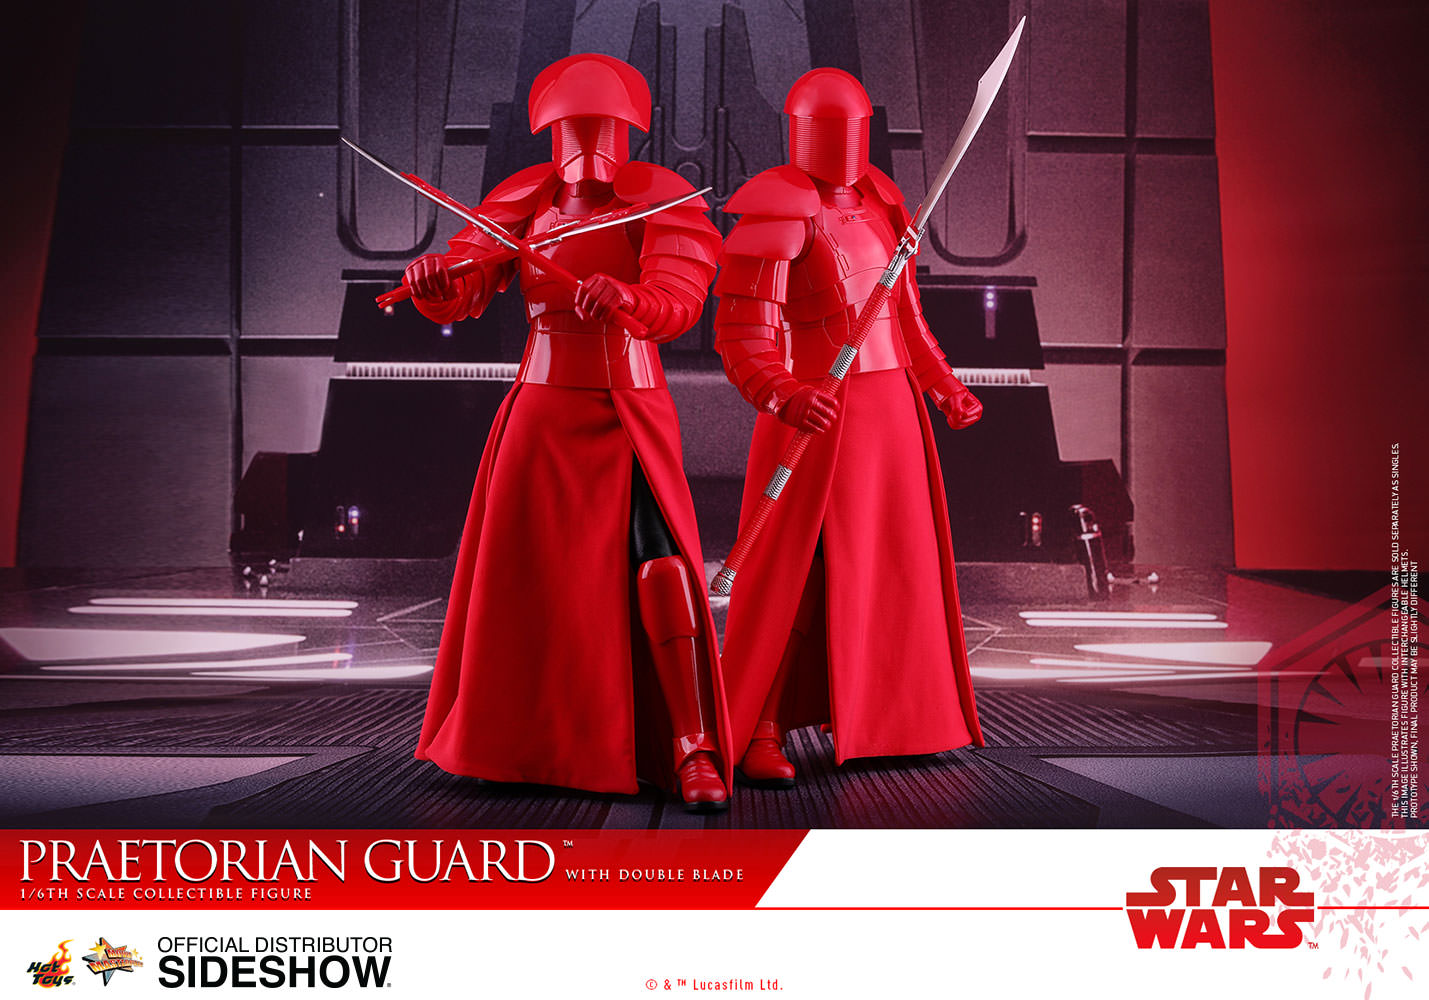 star-wars-praetorian-guard-with-double-blade-sixth-scale-hot-toys-903183-09